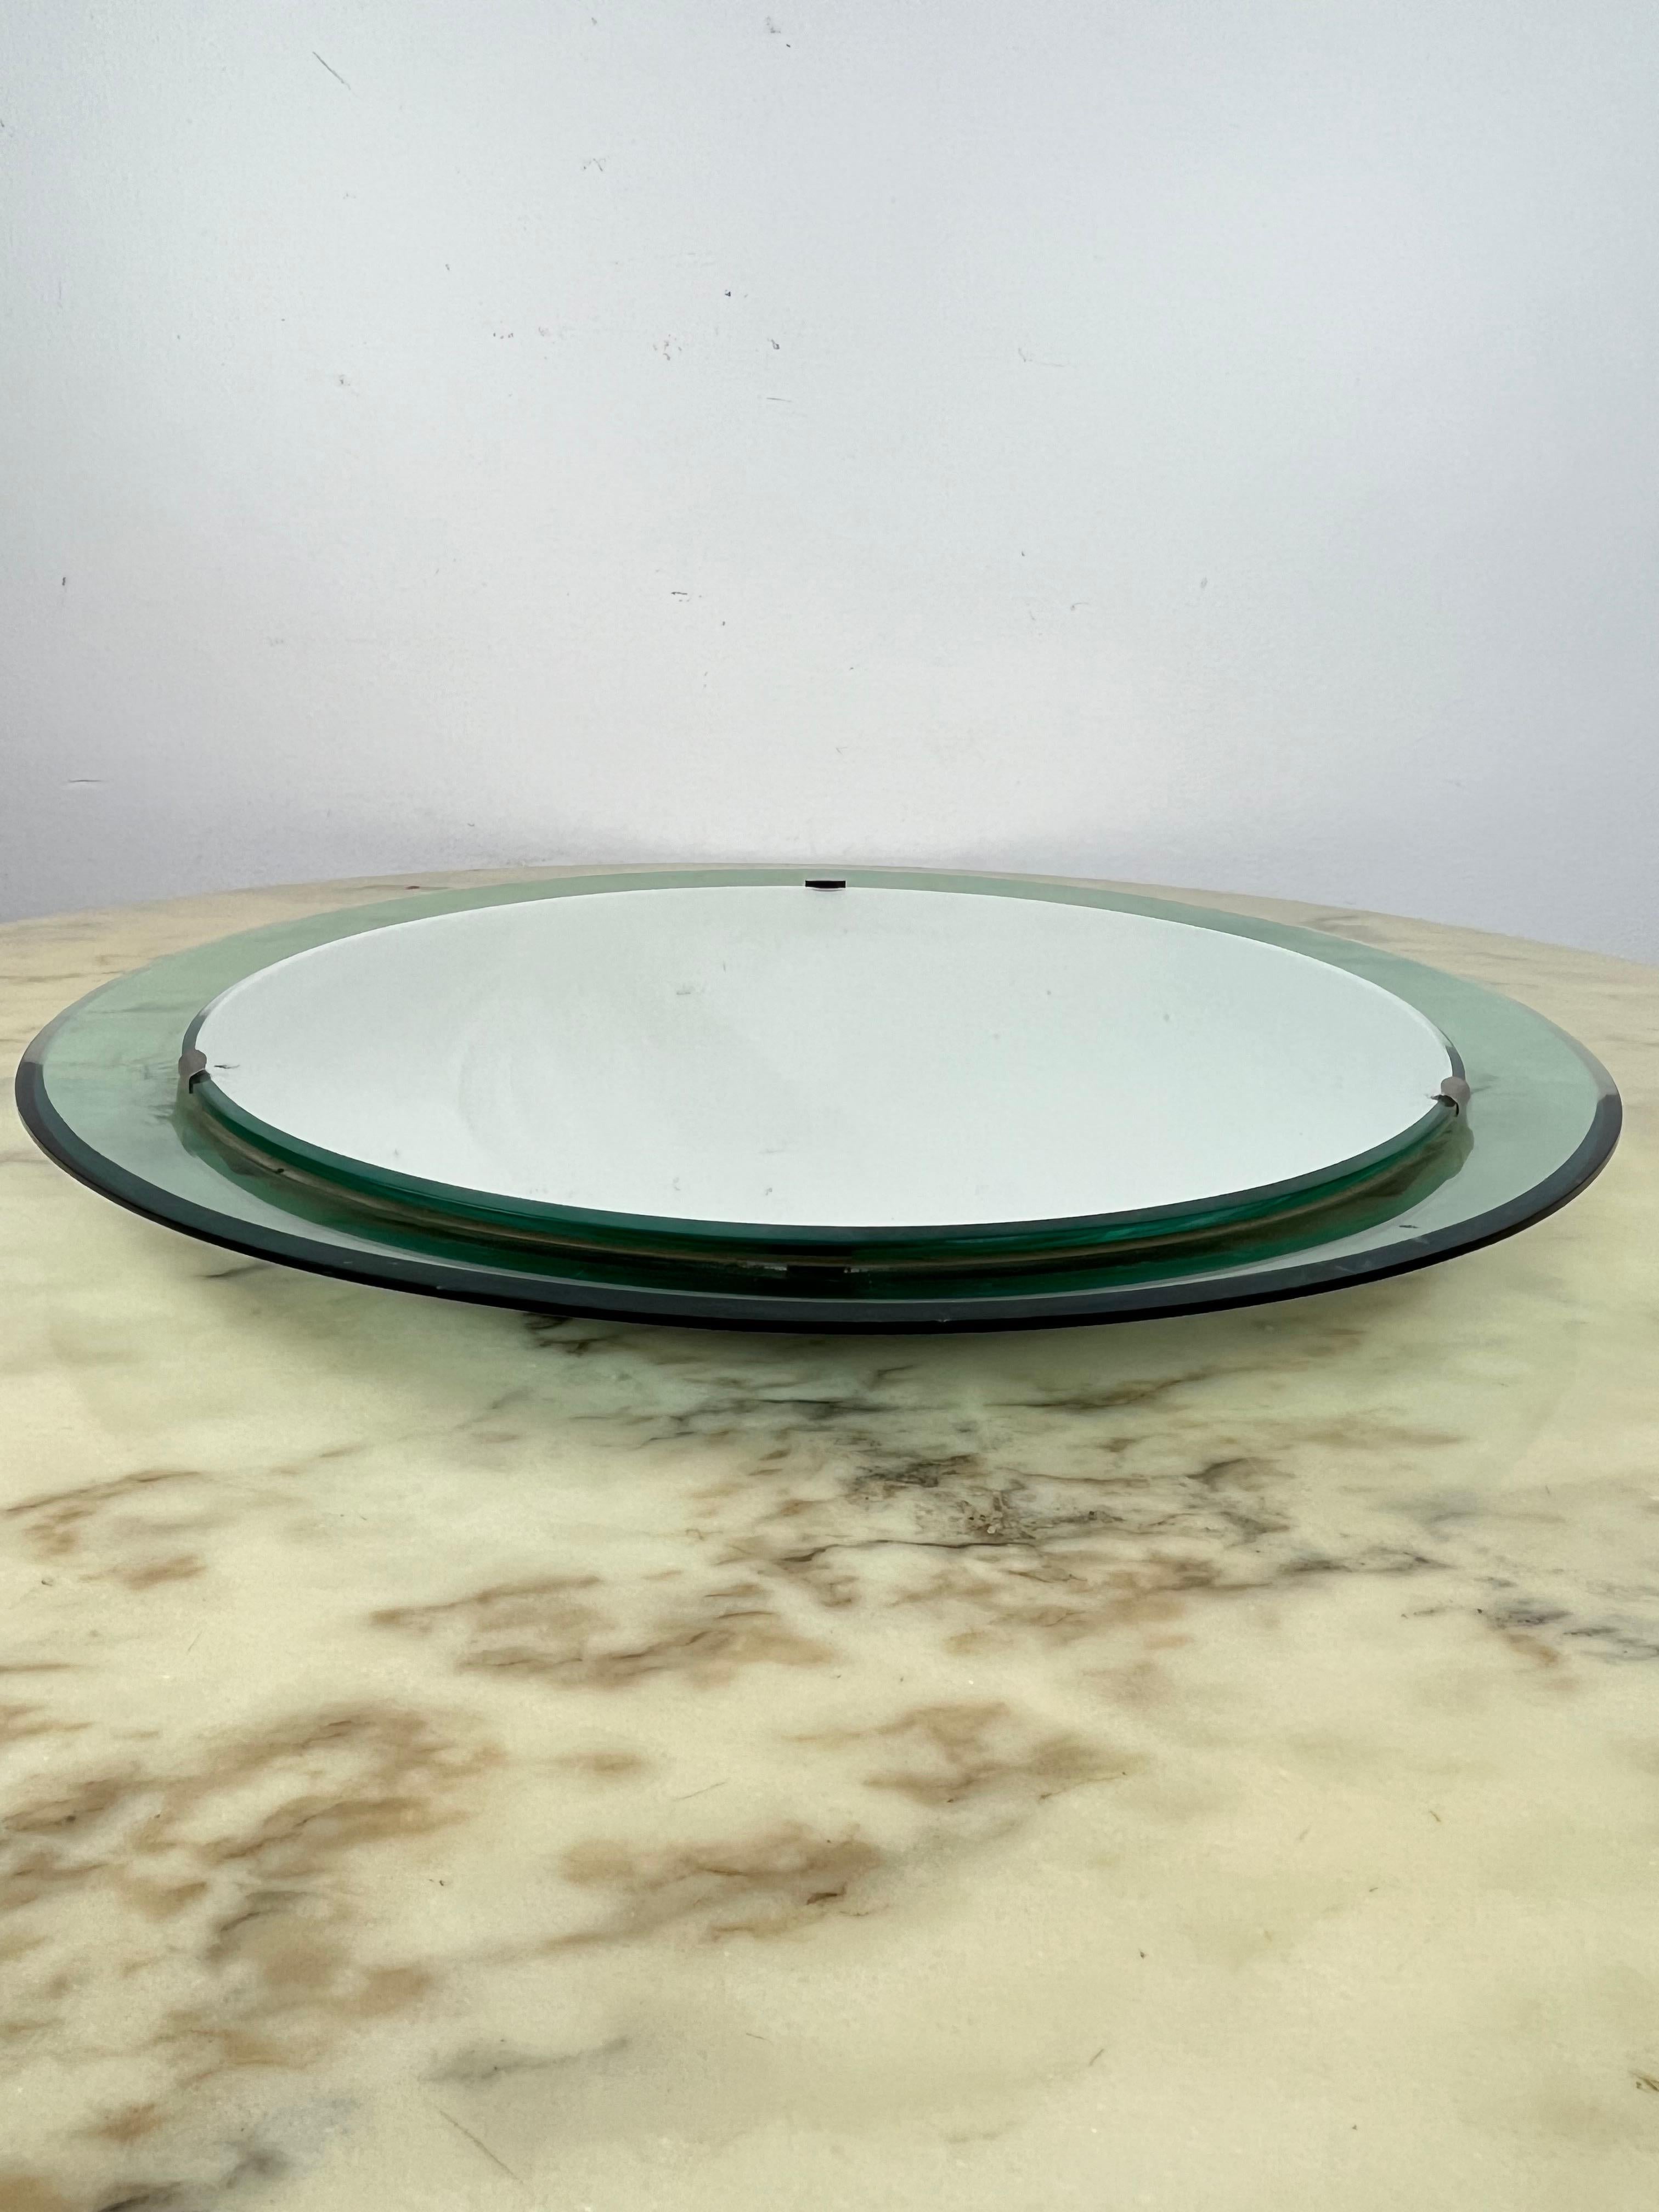 Mid-Century Curved Round Mirror Attributed to Max Ingrand for Fontana Arte 1960s Italian Design
Frame in shades of green, intact and in good condition.